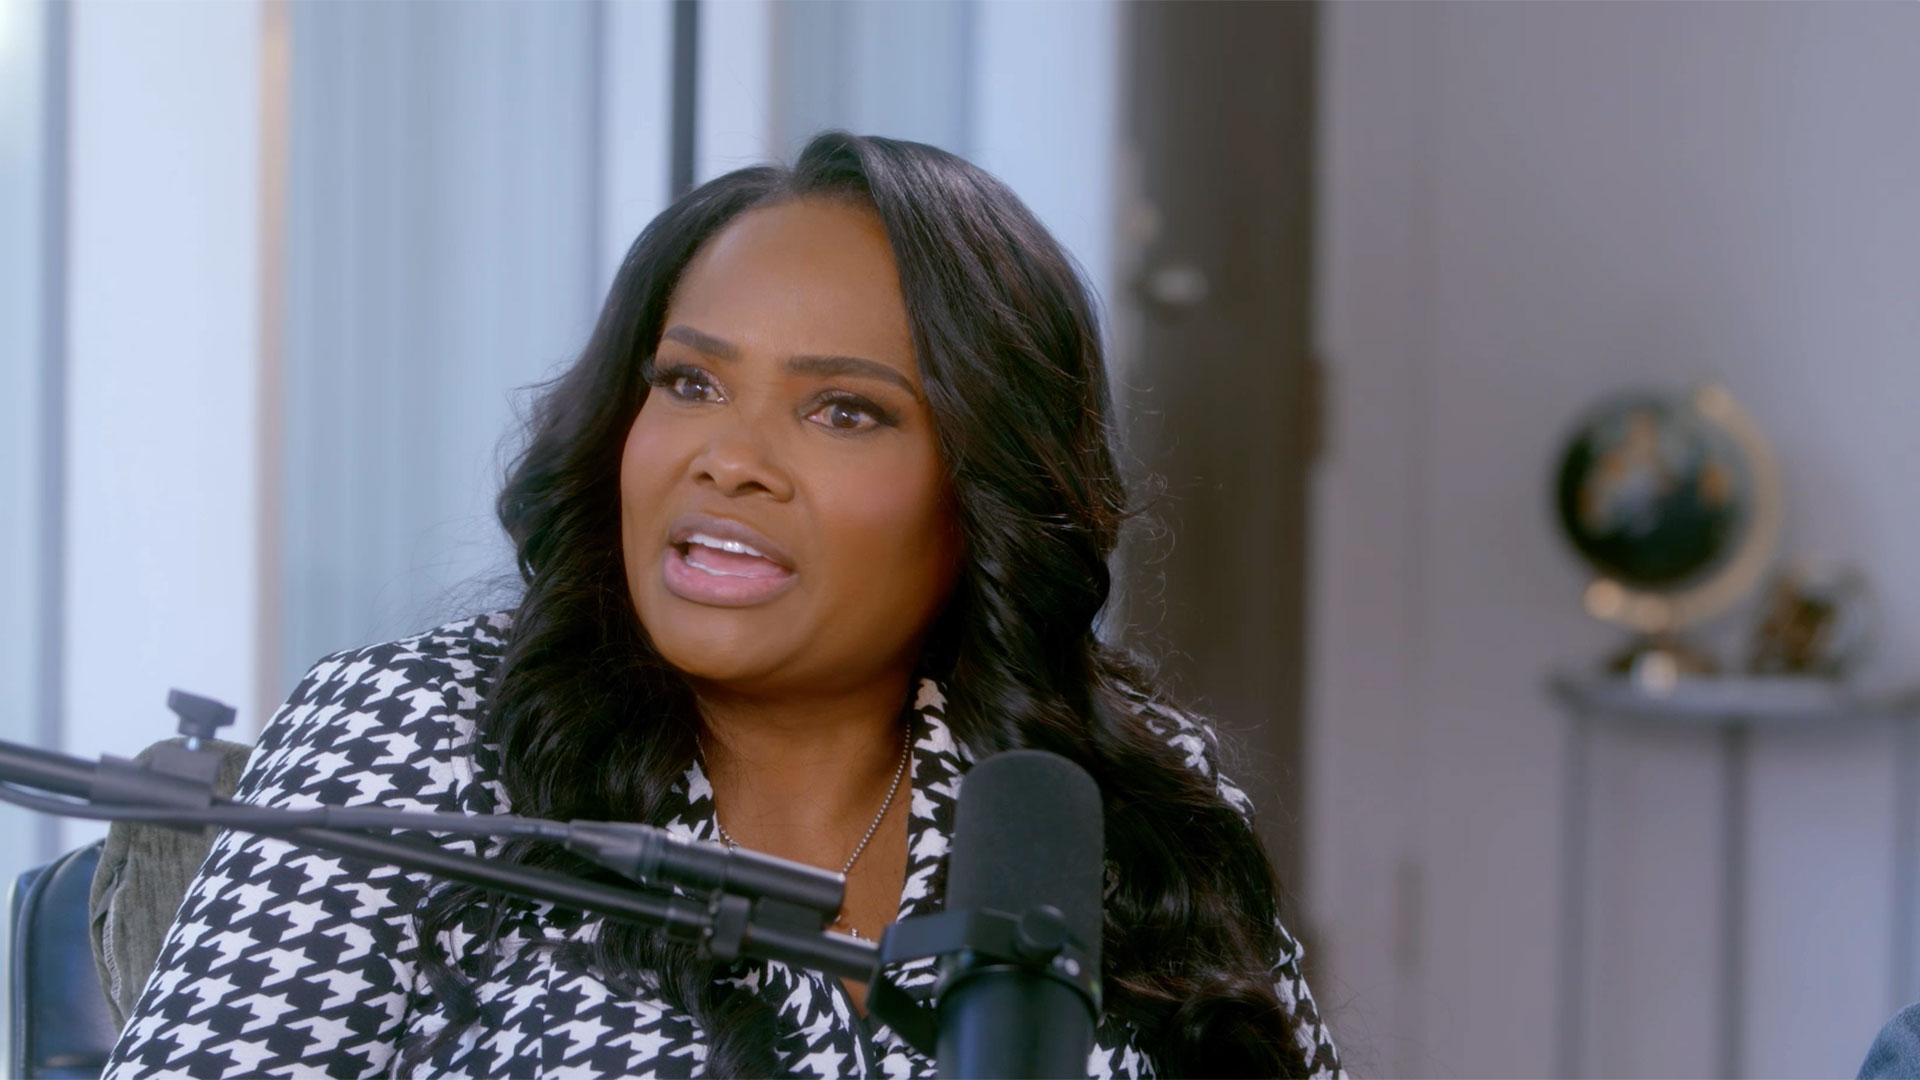 Dr. Heavenly Kimes Thinks the Younger Generation of Reality Stars "Just Aren't Built Like We Are"